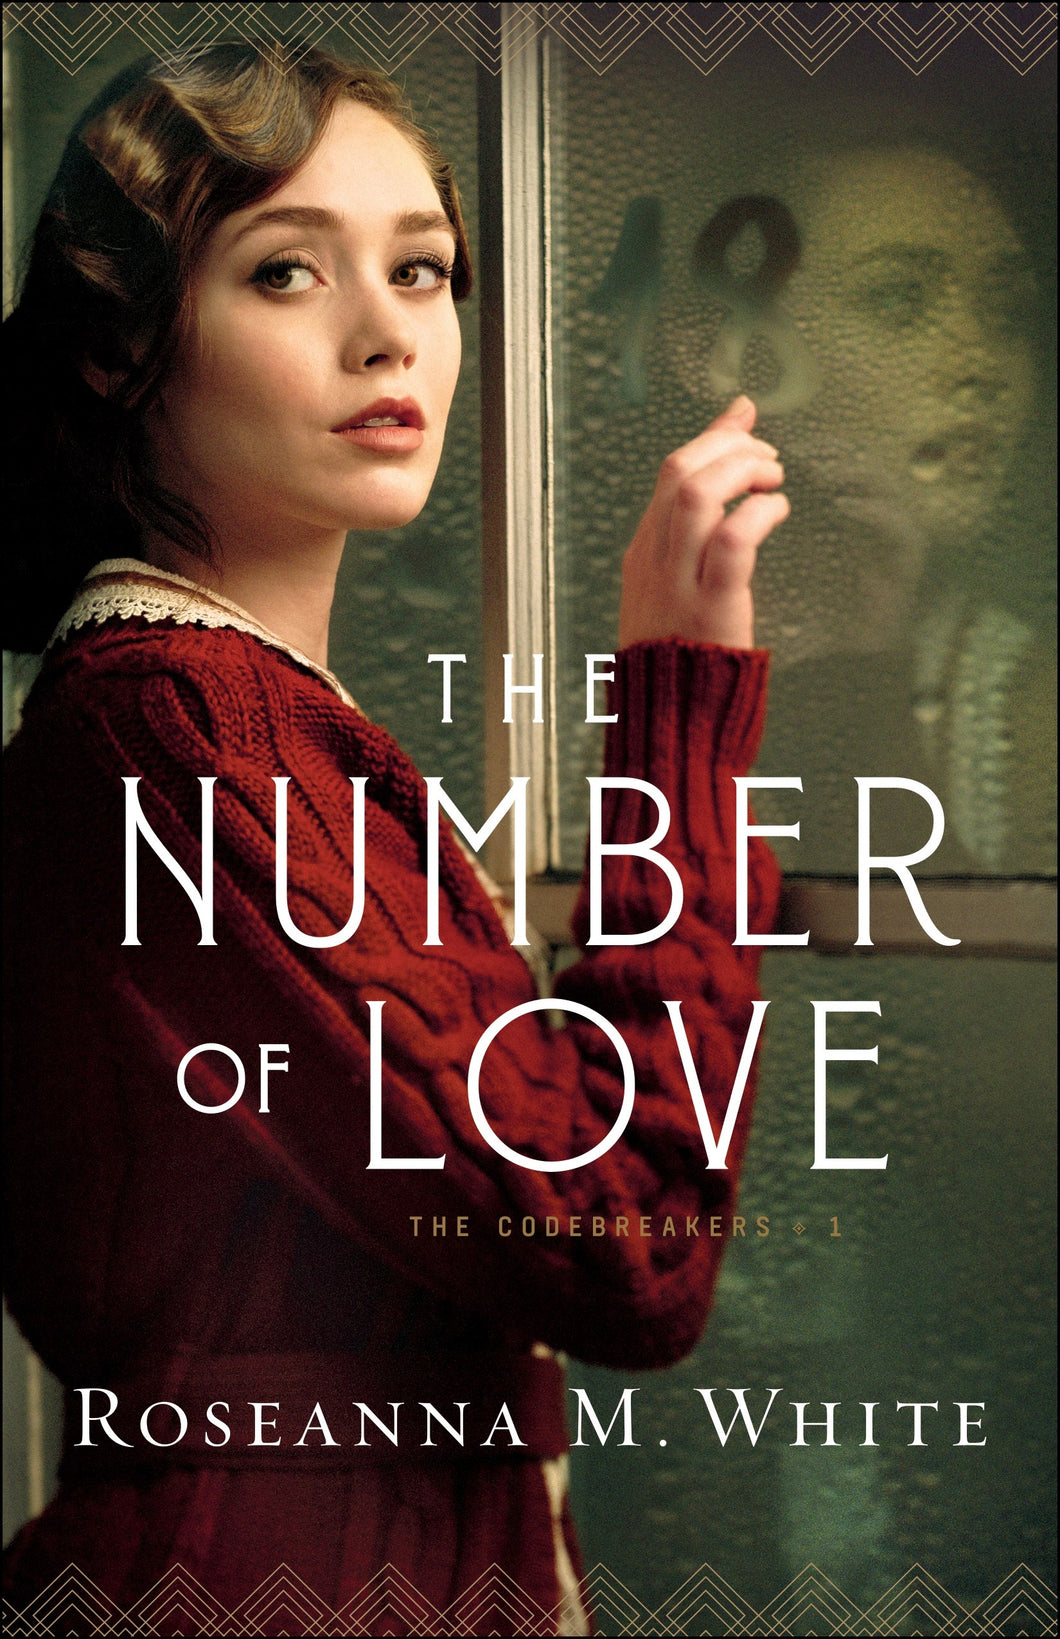 The Number Of Love (The Codebreakers #1)